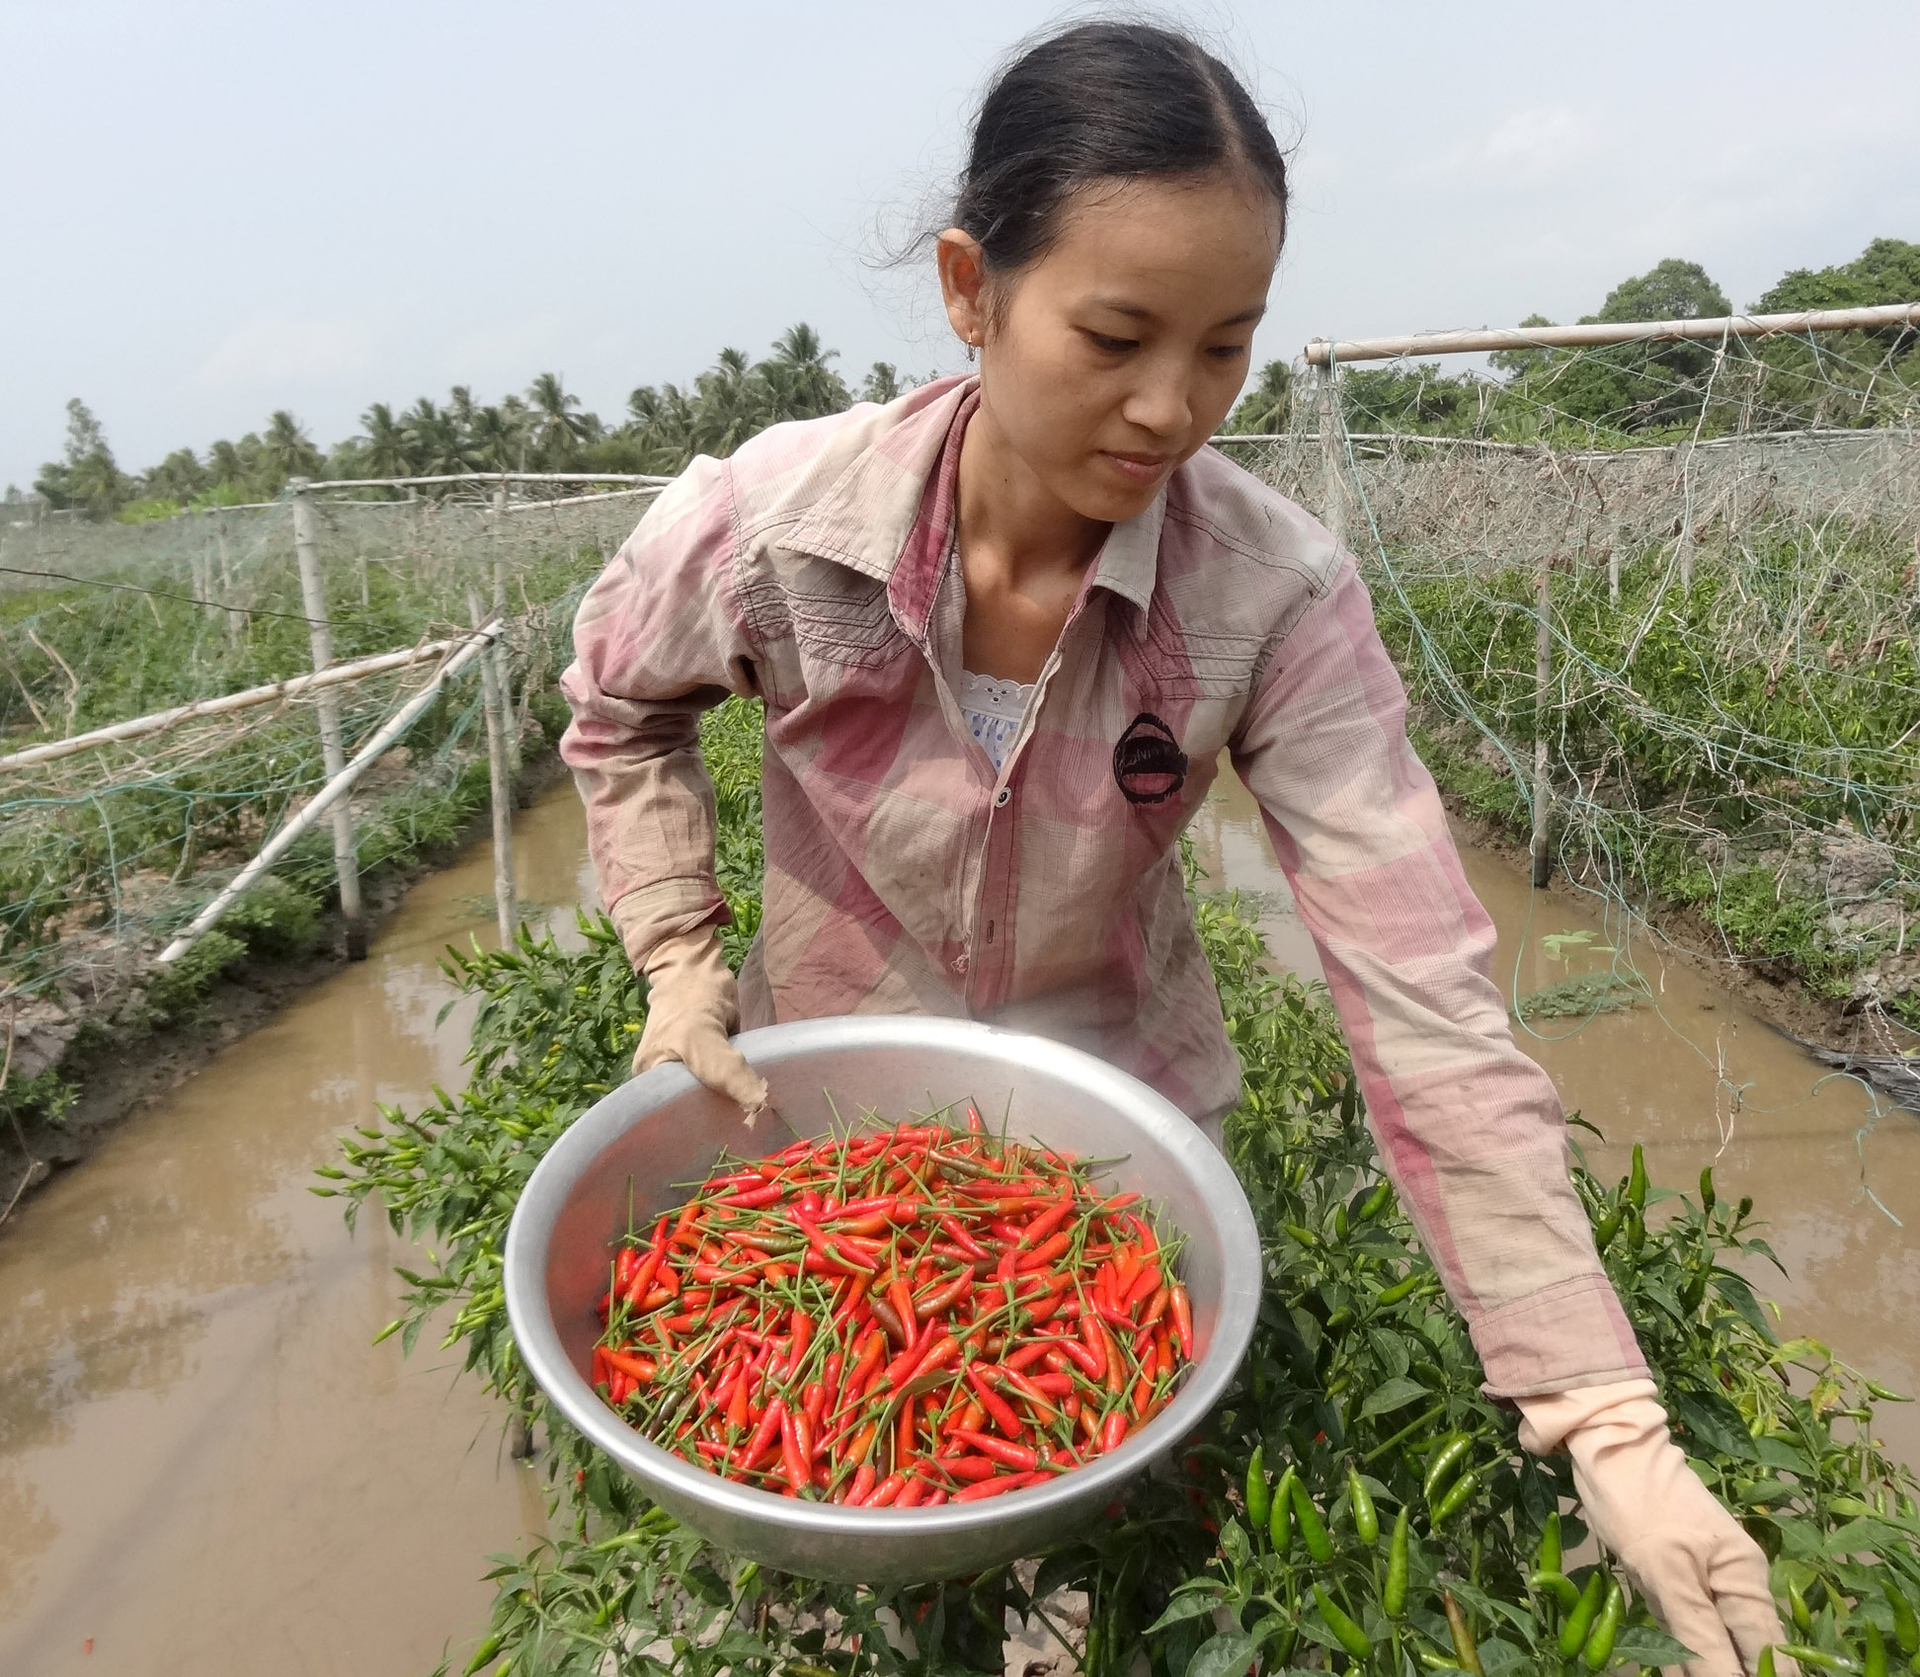 Farmers harvesting chili peppers in Vinh Long province. Photo: Son Trang.